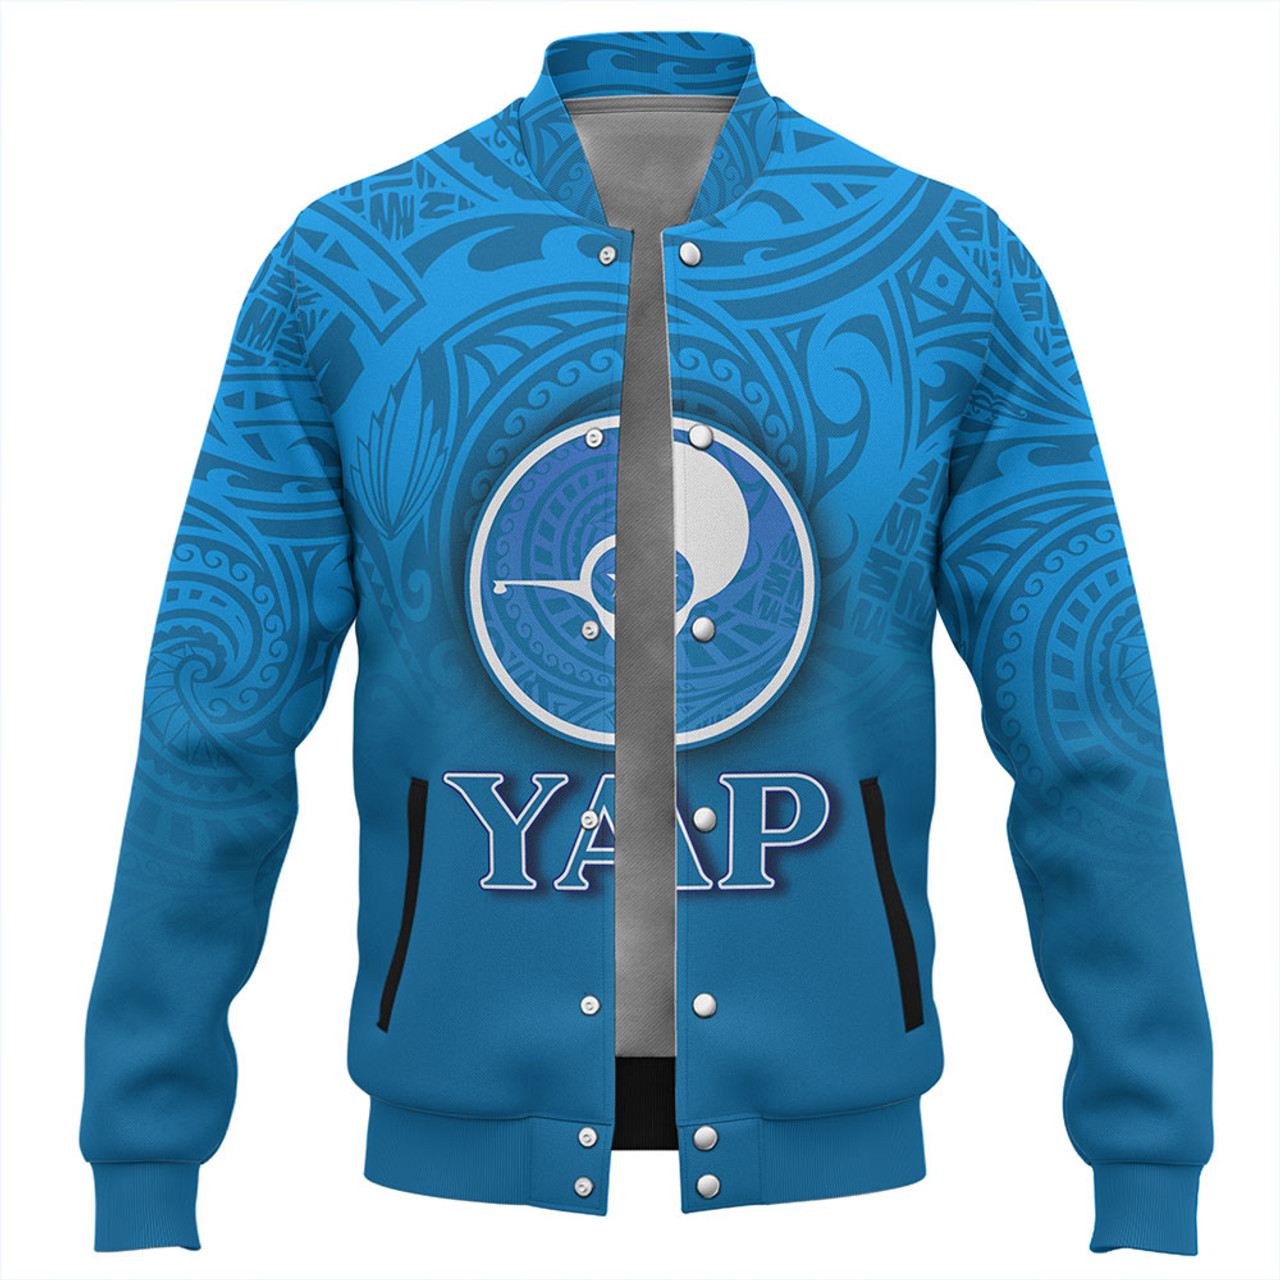 Yap State Baseball Jacket Flag Color With Traditional Patterns